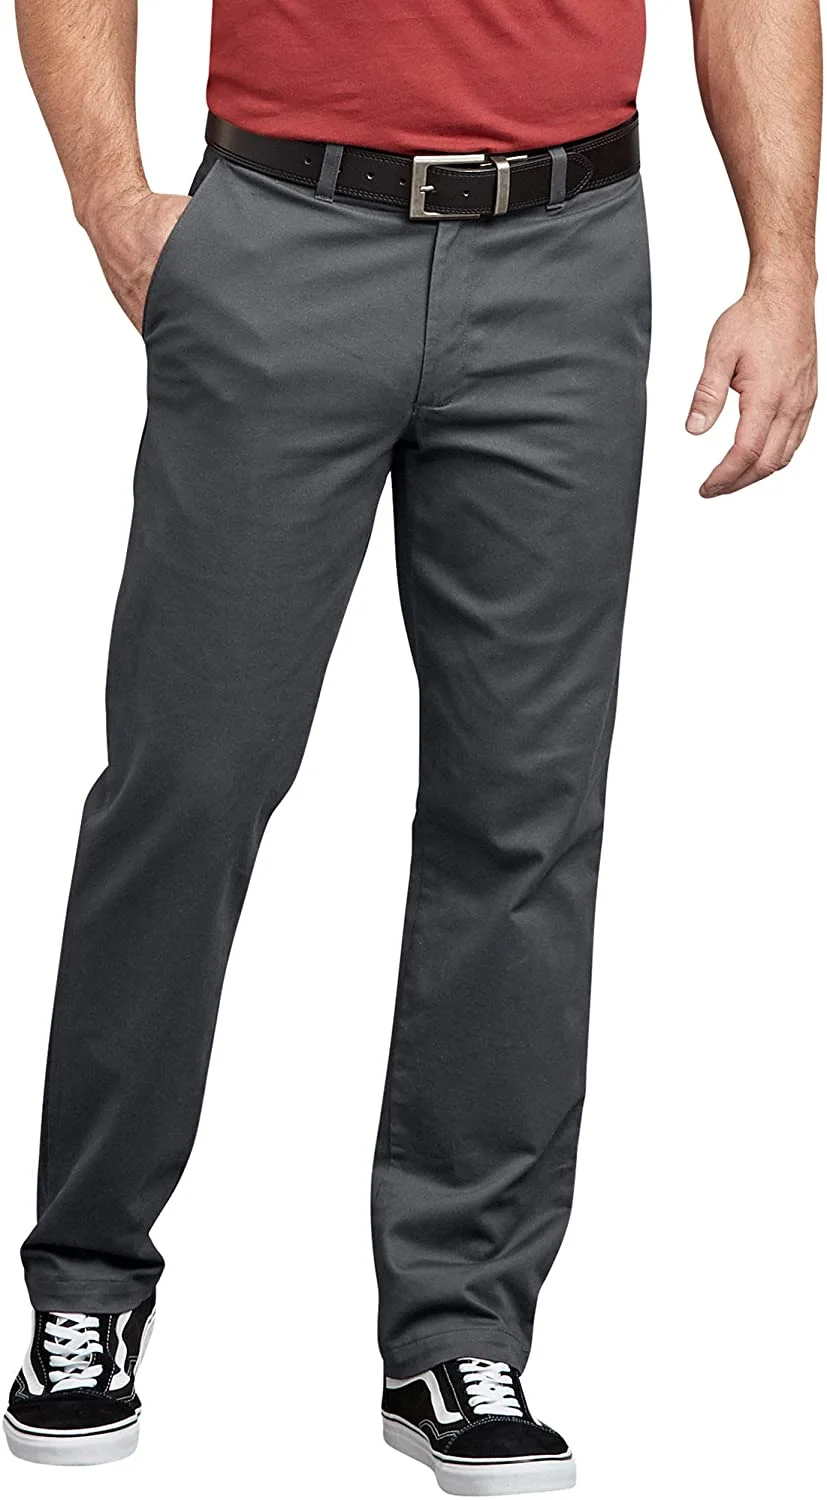 Cargo Trousers - Bangladesh Factory, Suppliers, Manufacturers